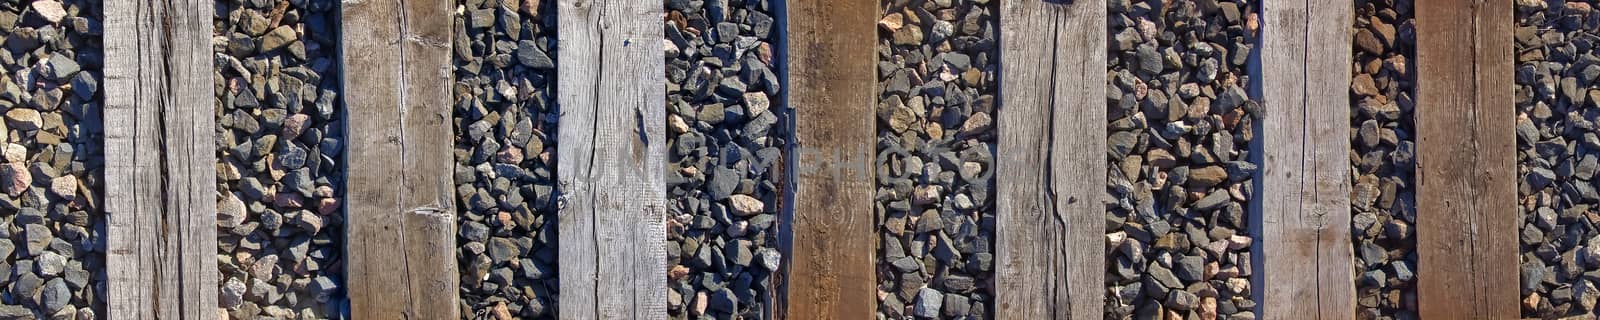 old wooden sleeper on railway panoramic shot. by PhotoTime